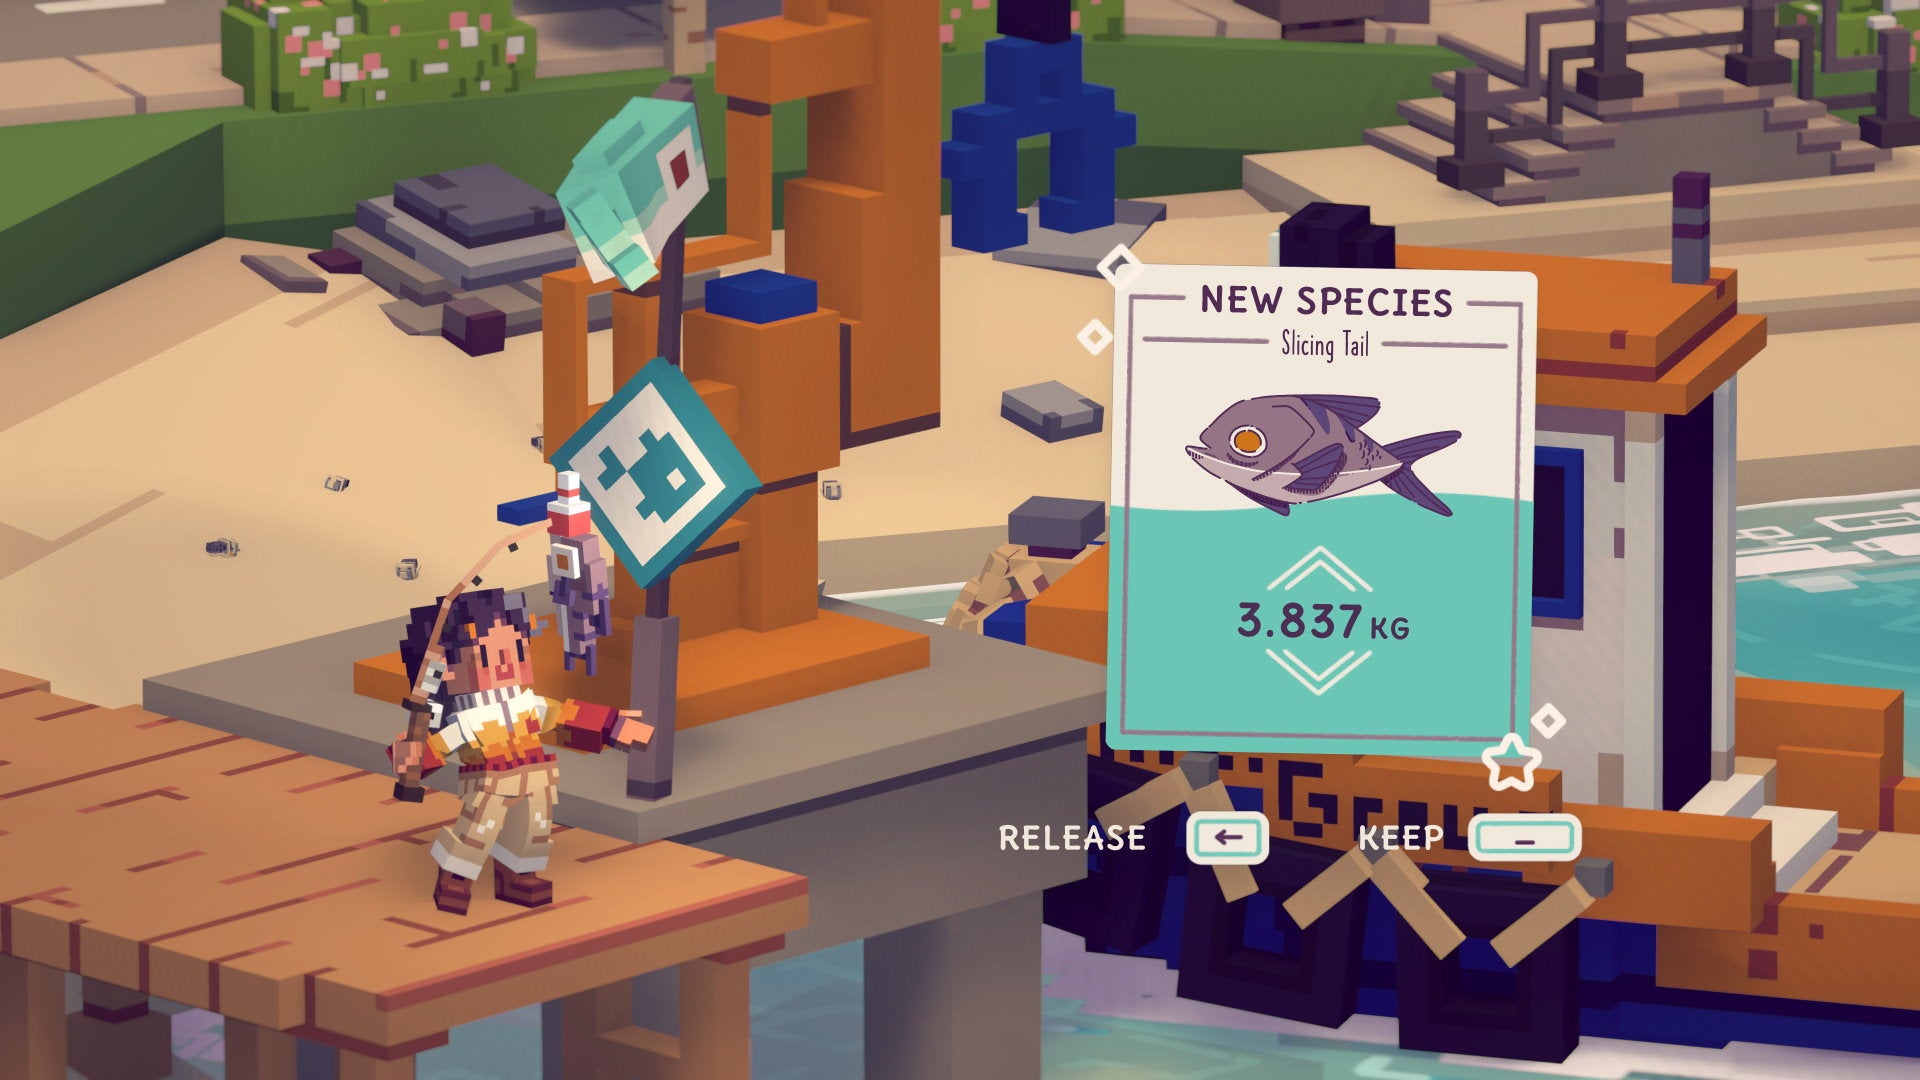 A player catches a fish in Moonglow Bay